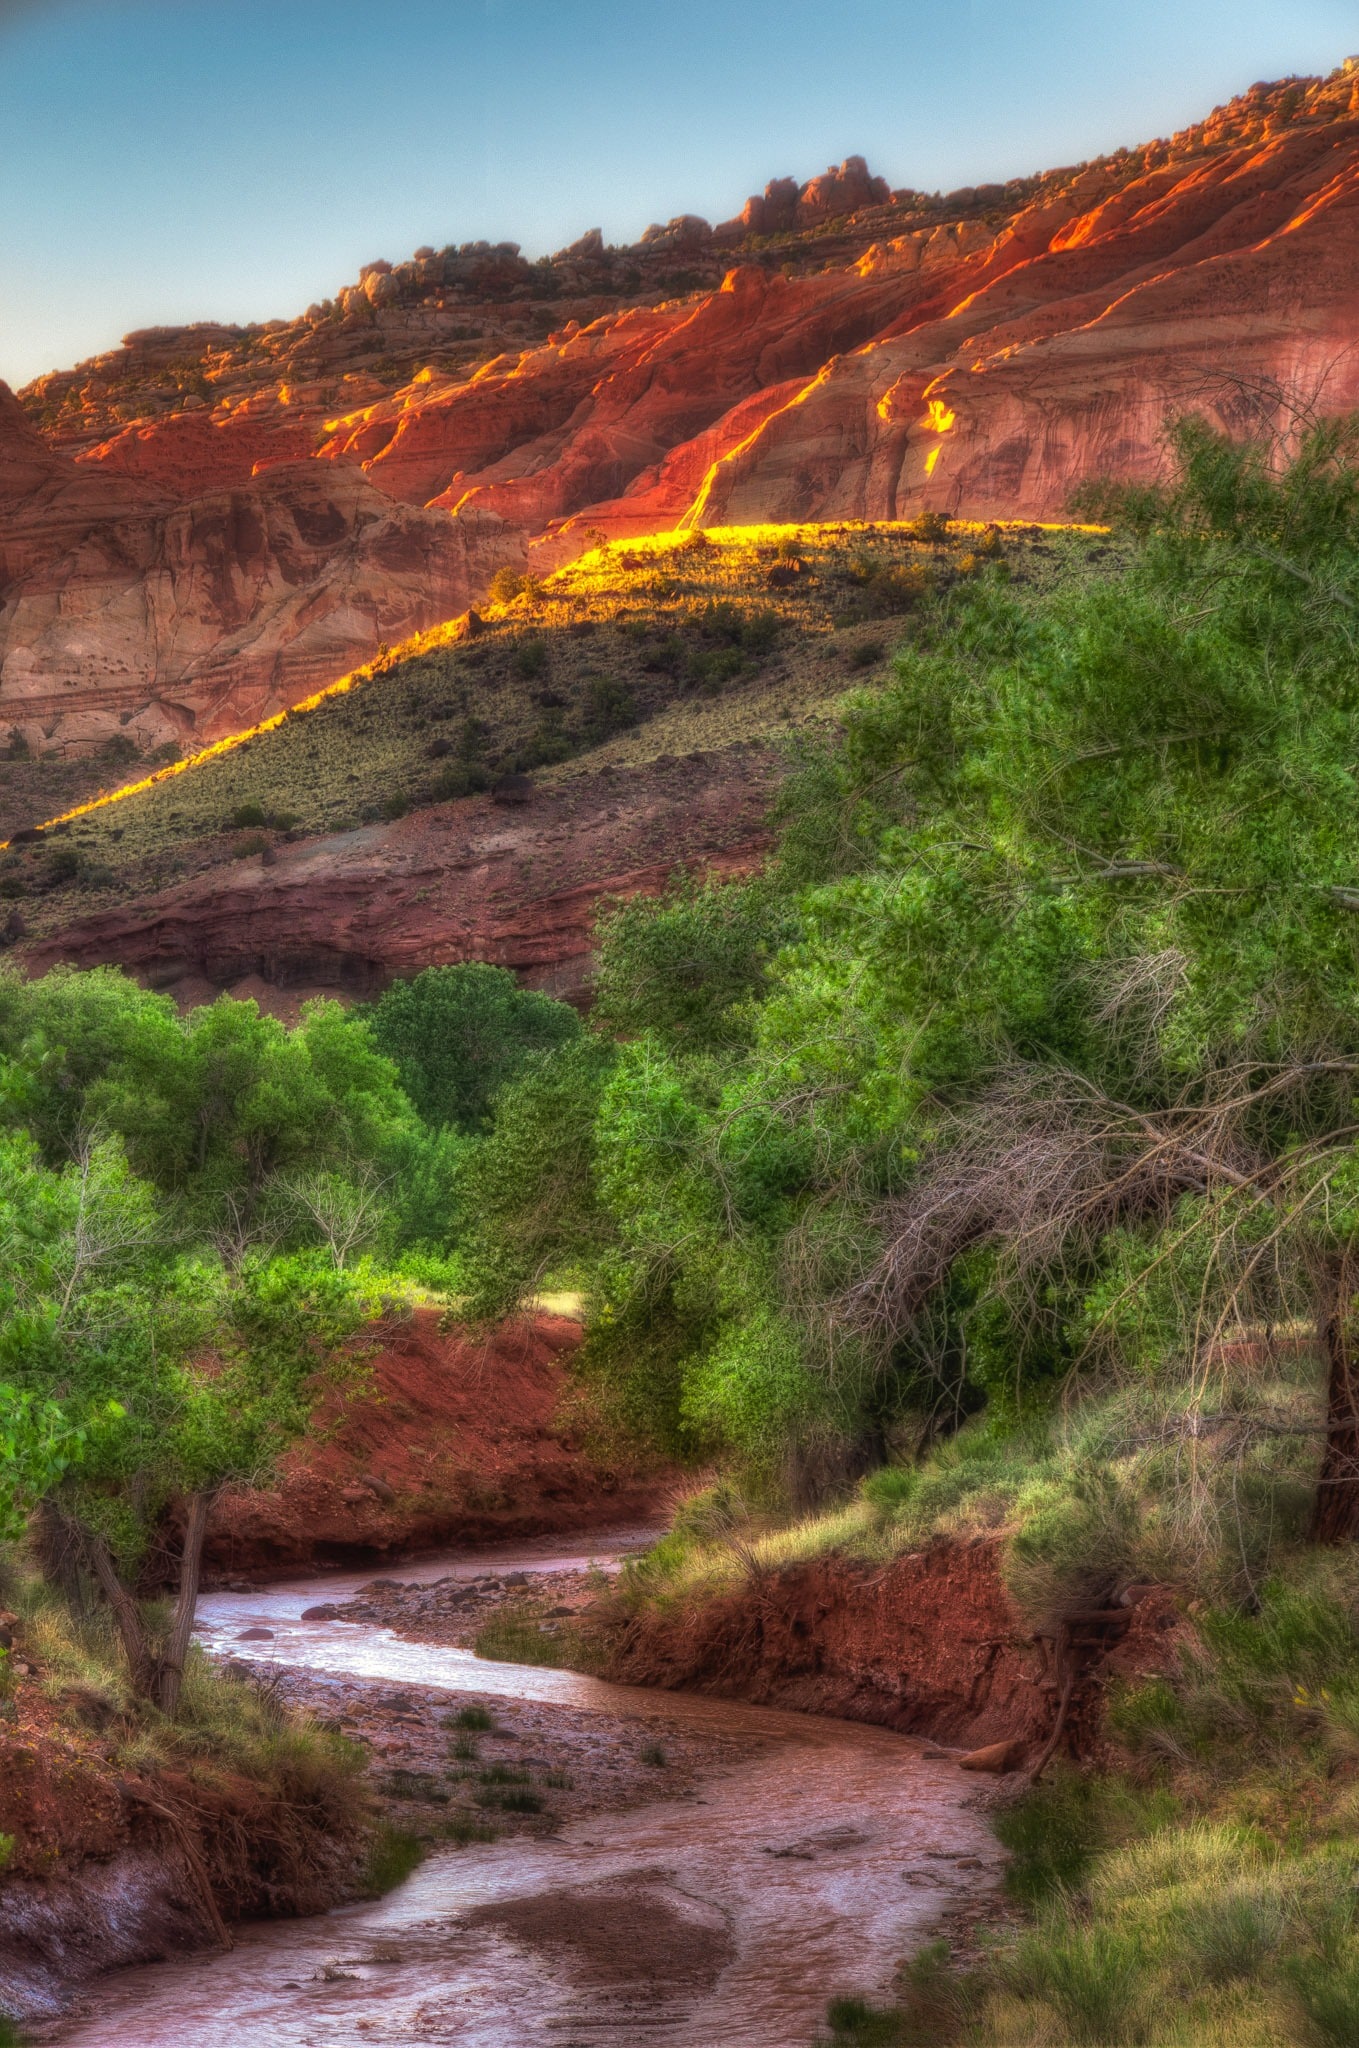 The first light catches the edges of cliffs above Sulphur creek just upstream of its junction with the Fremont River in Capitol Reef National Park.